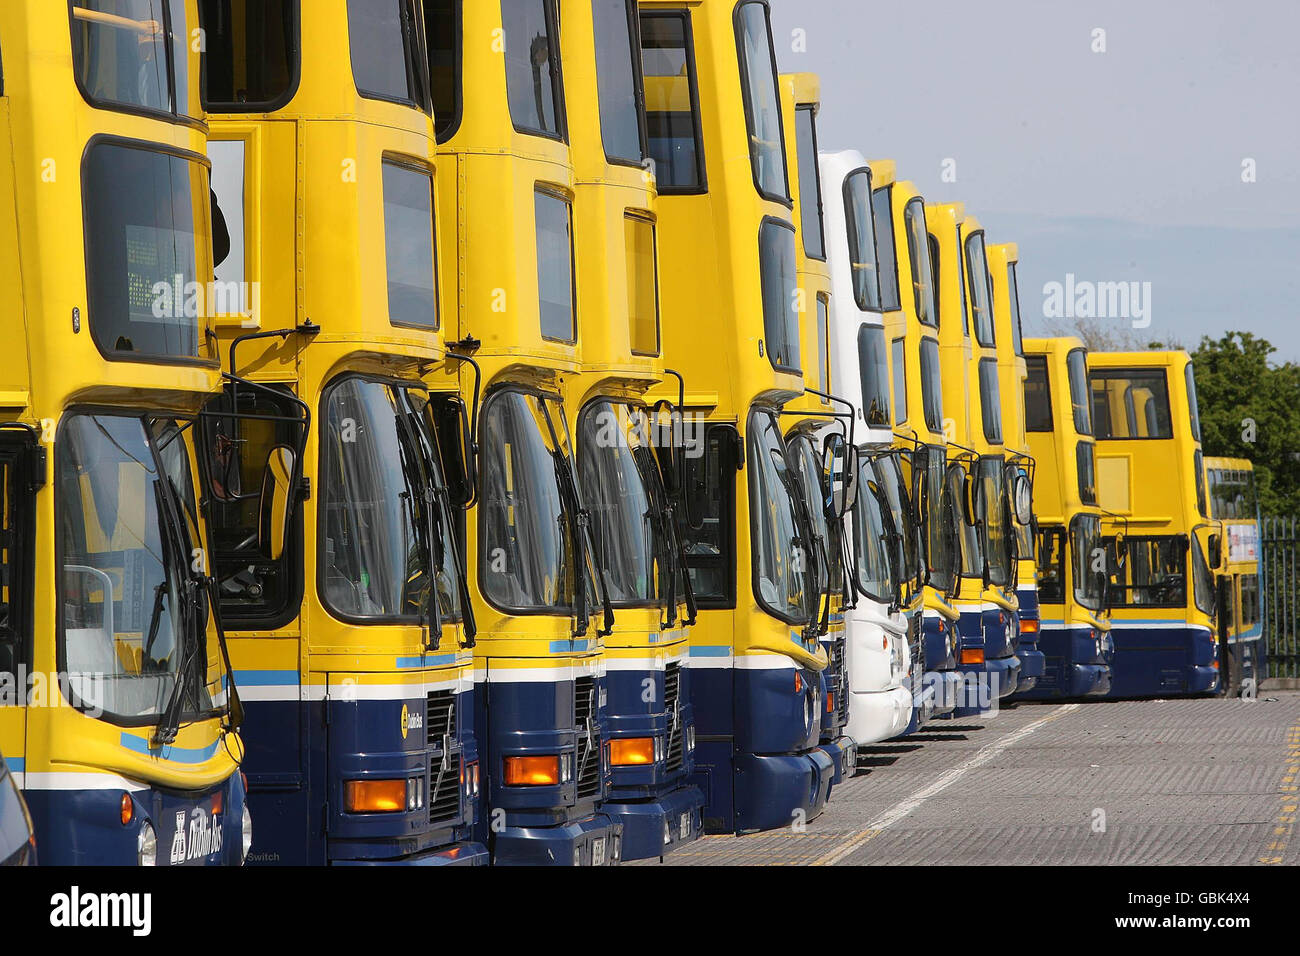 Buses at the Harristown Depot, Dublin after a wildcat bus strike spread across the capital today amid claims that drivers have intimidated others attempting to work. Stock Photo